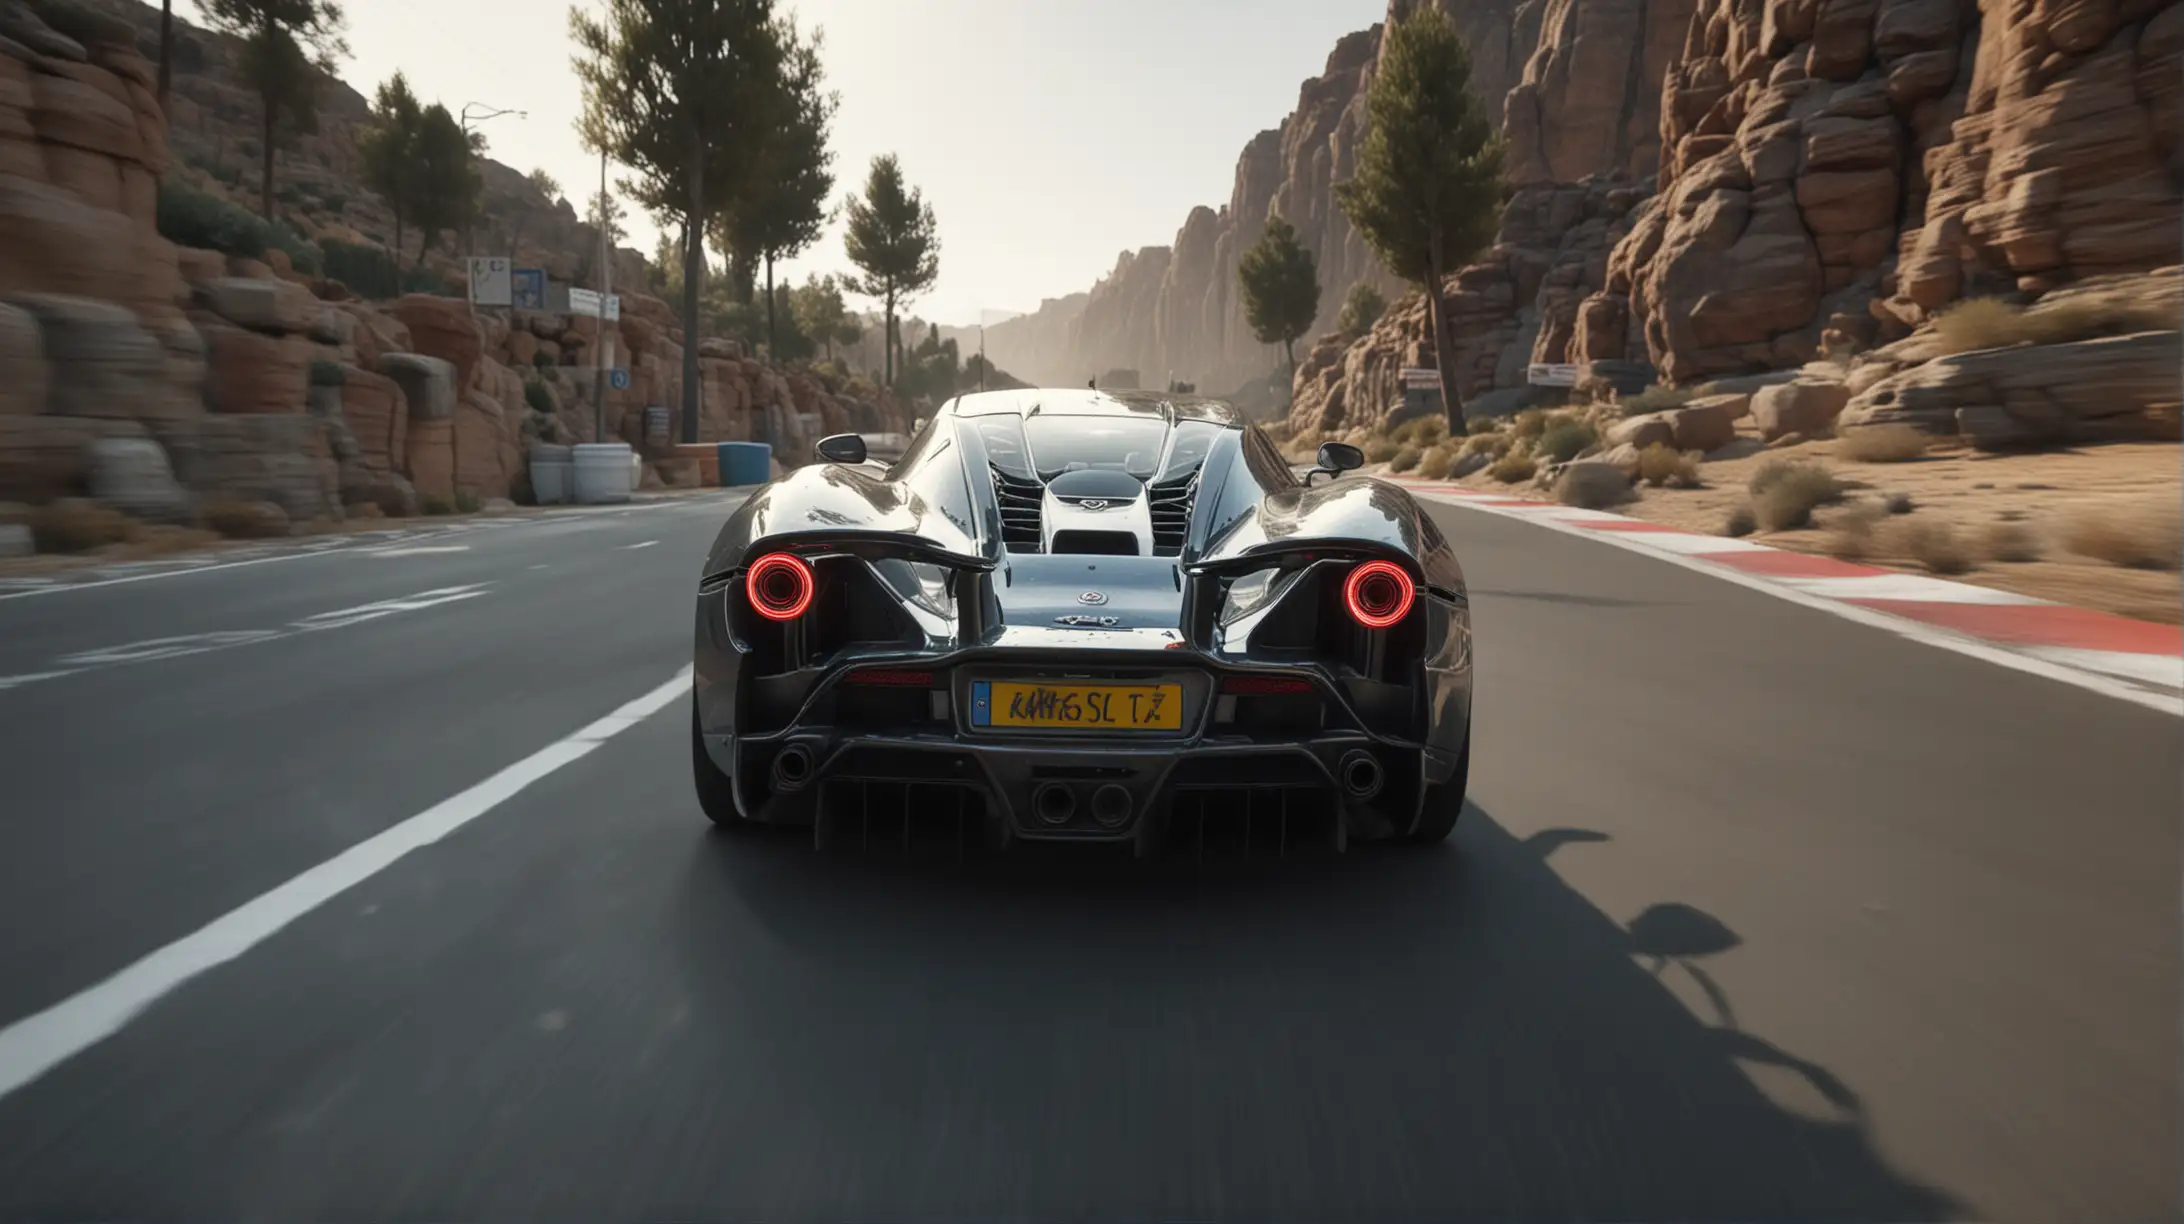 Generate a 4K hyperrealistic image in a first person pov, of a someone racing in a super car.